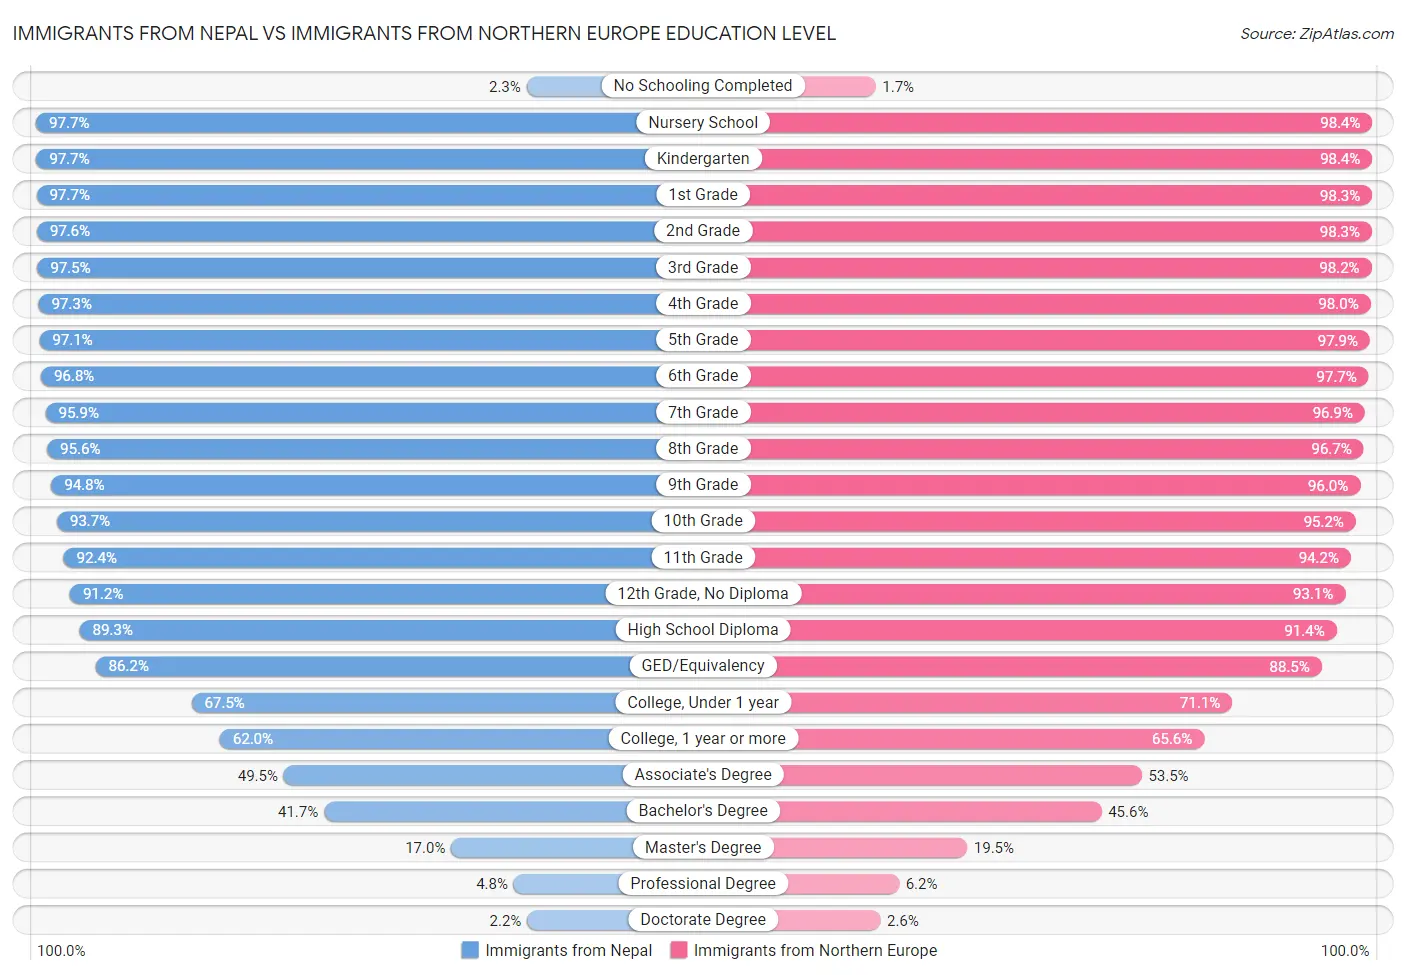 Immigrants from Nepal vs Immigrants from Northern Europe Education Level